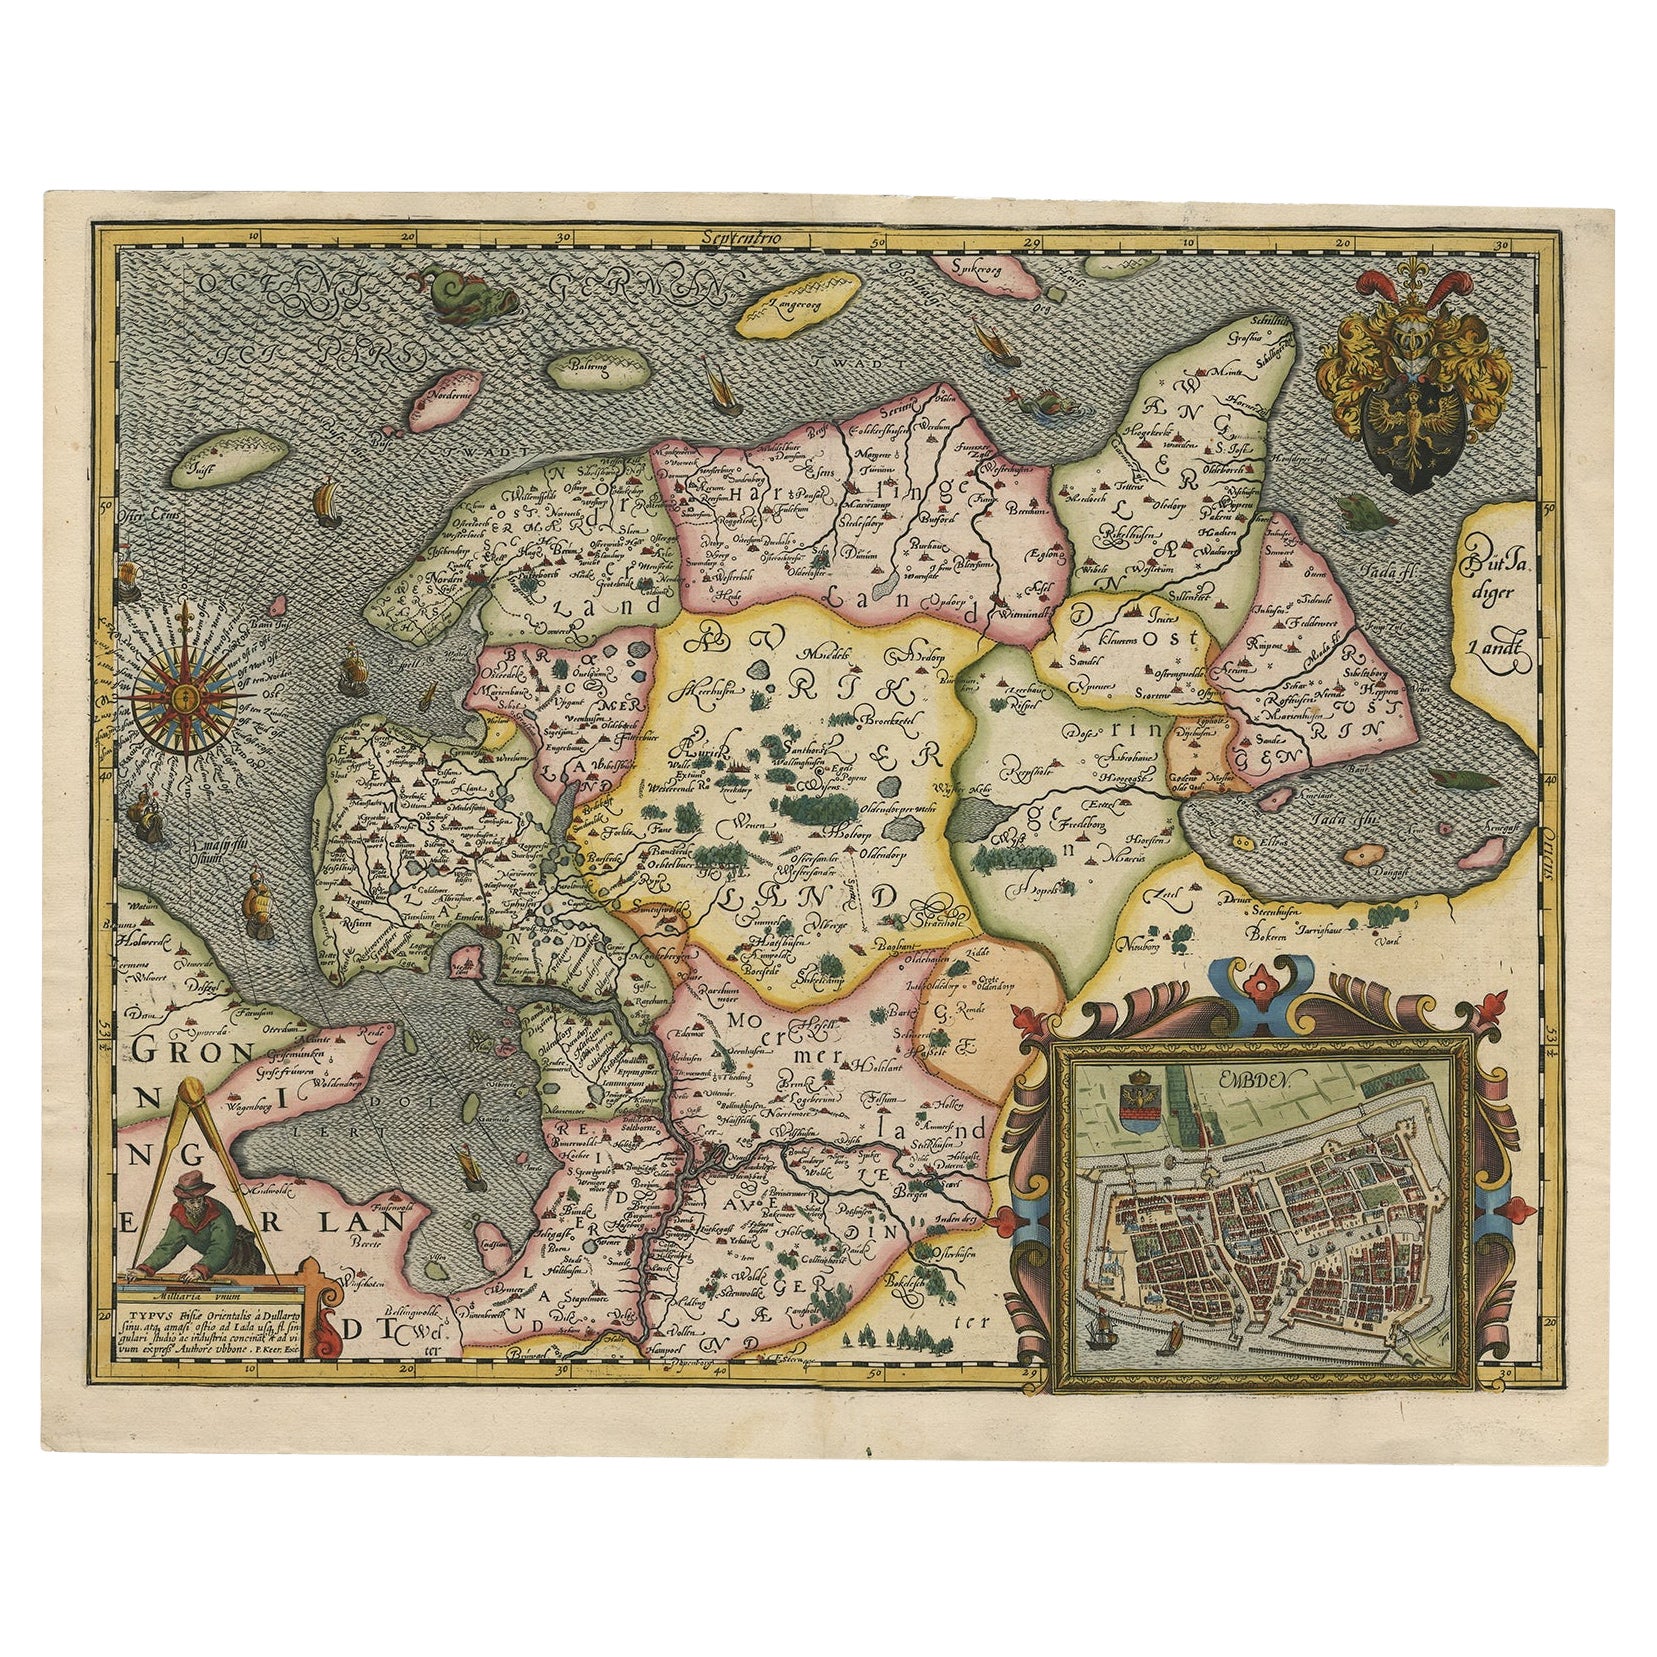 Stunning Decorative Antique Map of East Frisia with an Inset of Emden, c.1610 For Sale